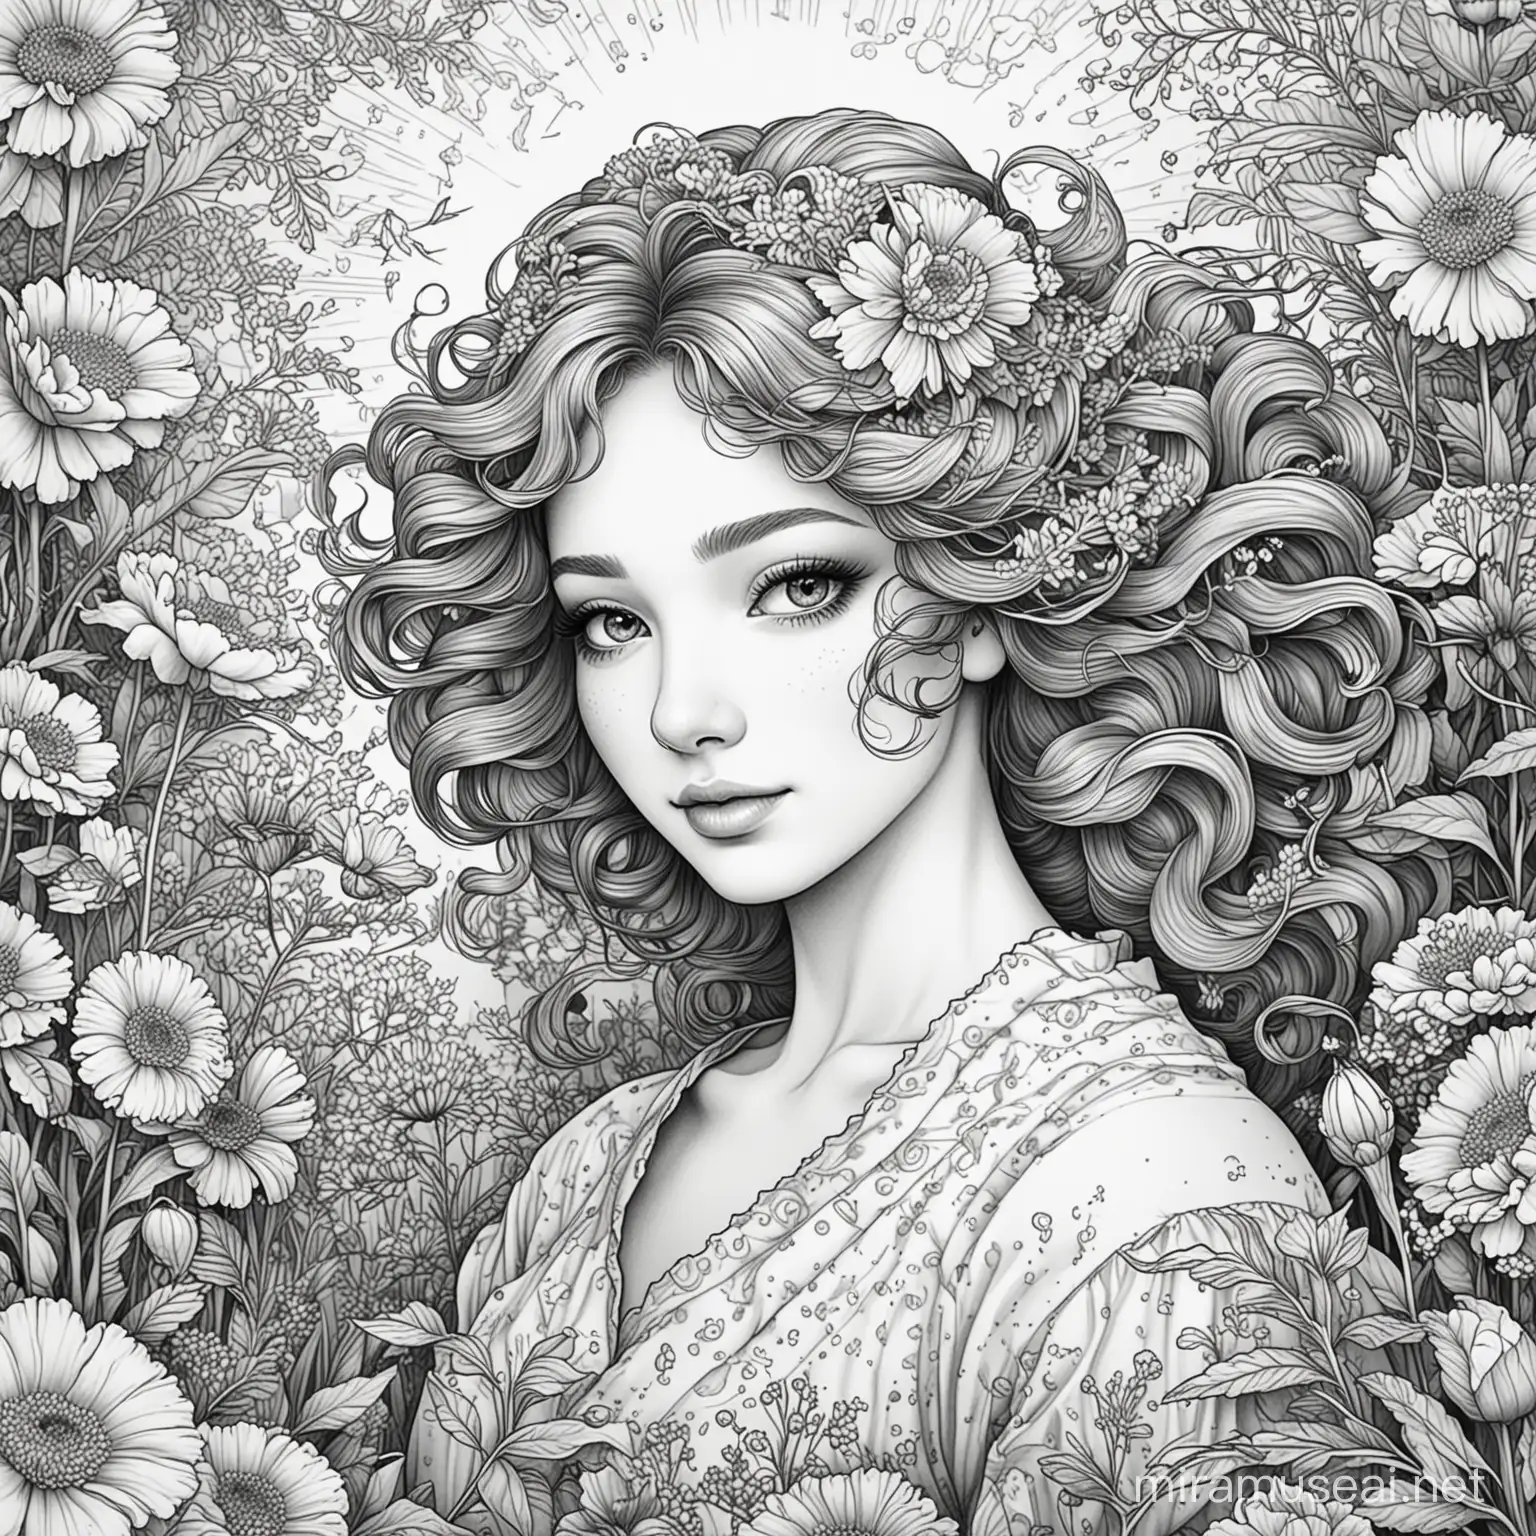 Generate a high-quality and visually stunning outlined only black-and-white illustration for coloring book of the Marigold Melody Spring Lady brings forth a melody of warmth and energy. The black-and-white petals symbolize the sun's radiance, infusing the atmosphere with the joyous spirit of spring. Each marigold becomes a musical note, inviting you to explore the lively and cheerful nature of these vibrant blooms through the eyes of the Marigold Melody Spring Lady. Let her be your muse in creating an artwork that captures the vibrant and uplifting essence of spring. The goal is to create a black and white illustration for coloring book that brings out the enchanting personality of the Marigold Melody Spring Lady and complements the festive spirit of spring season. Please ensure the final output is detailed, inviting, and suitable for a coloring book aimed at both children and adults., Mysterious, Mysterious, Mysterious